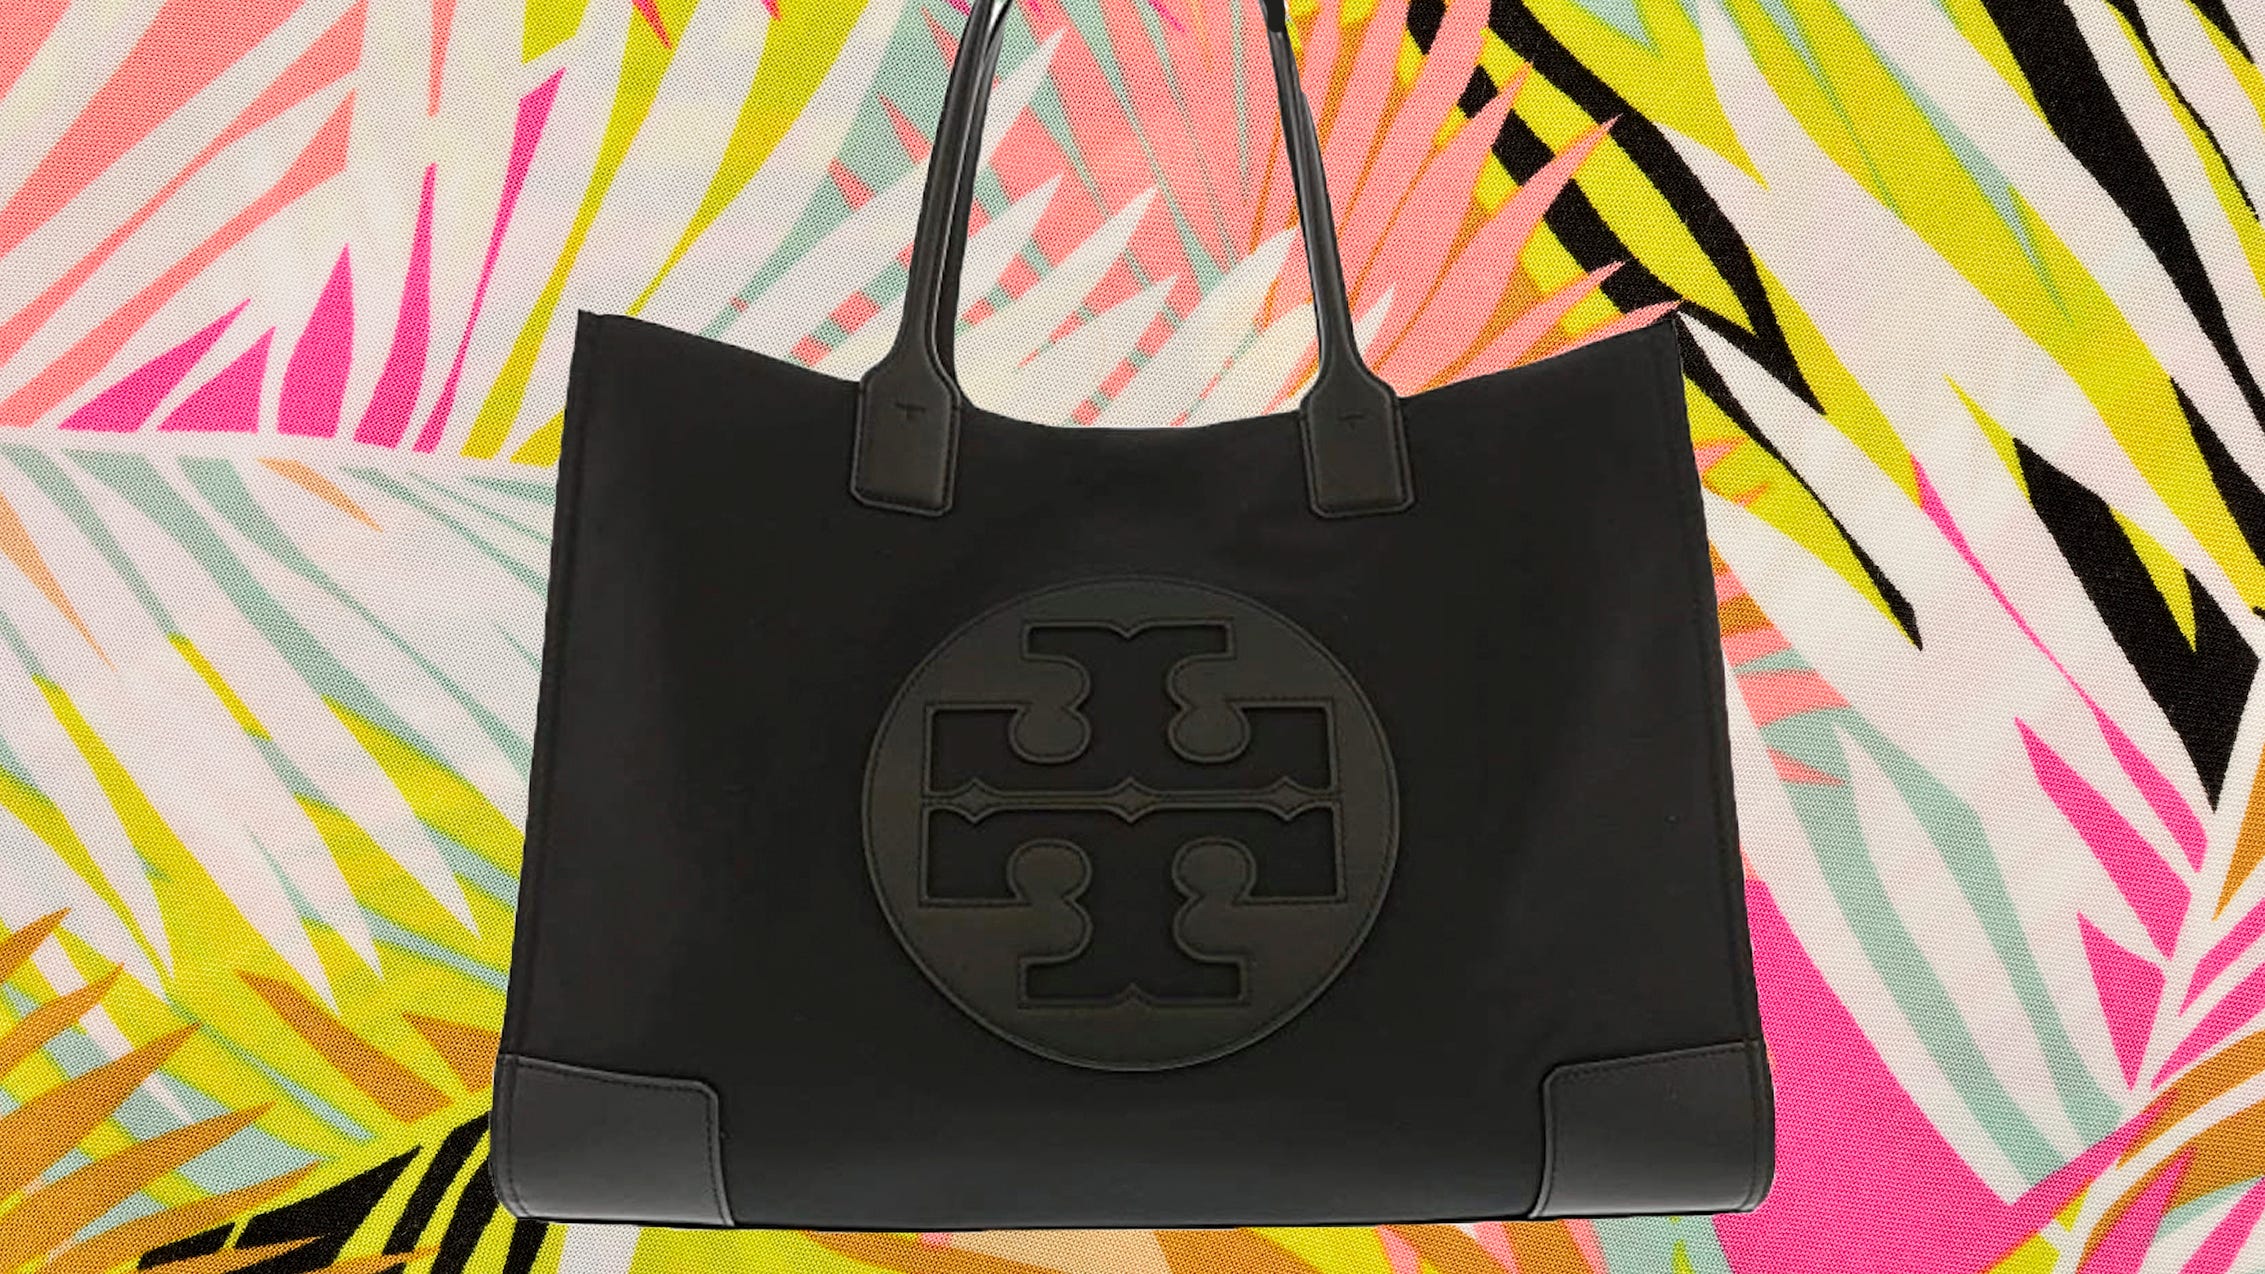 Tory Burch Valentine's Day deals: Save up to 50% on purses and shoes